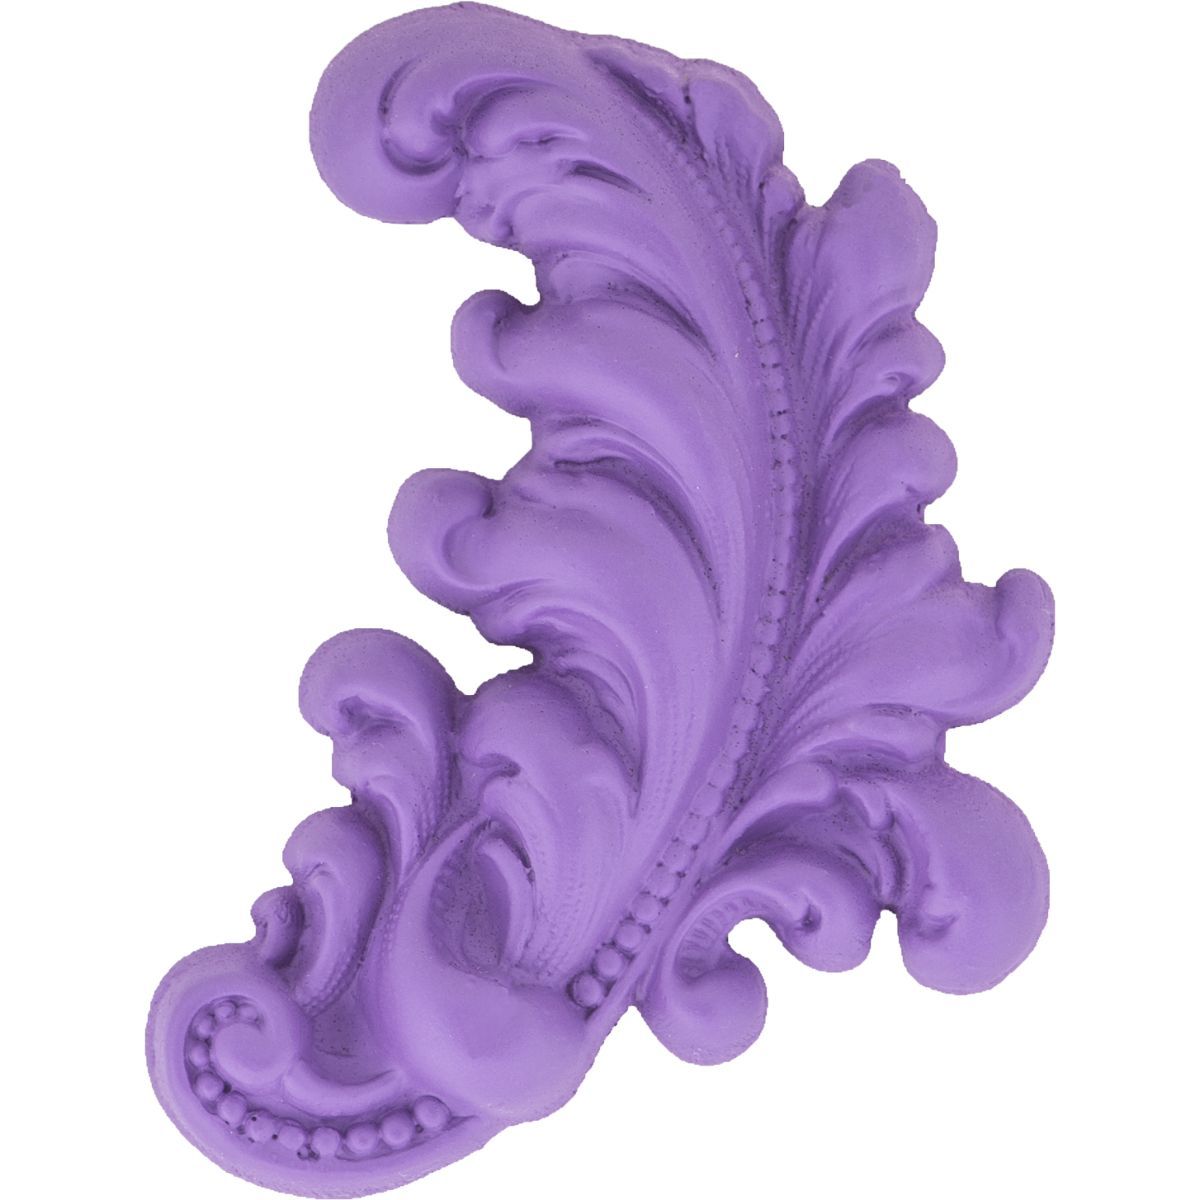 Feather Crest Mold Marvelous Molds Silicone Mold - Bake Supply Plus